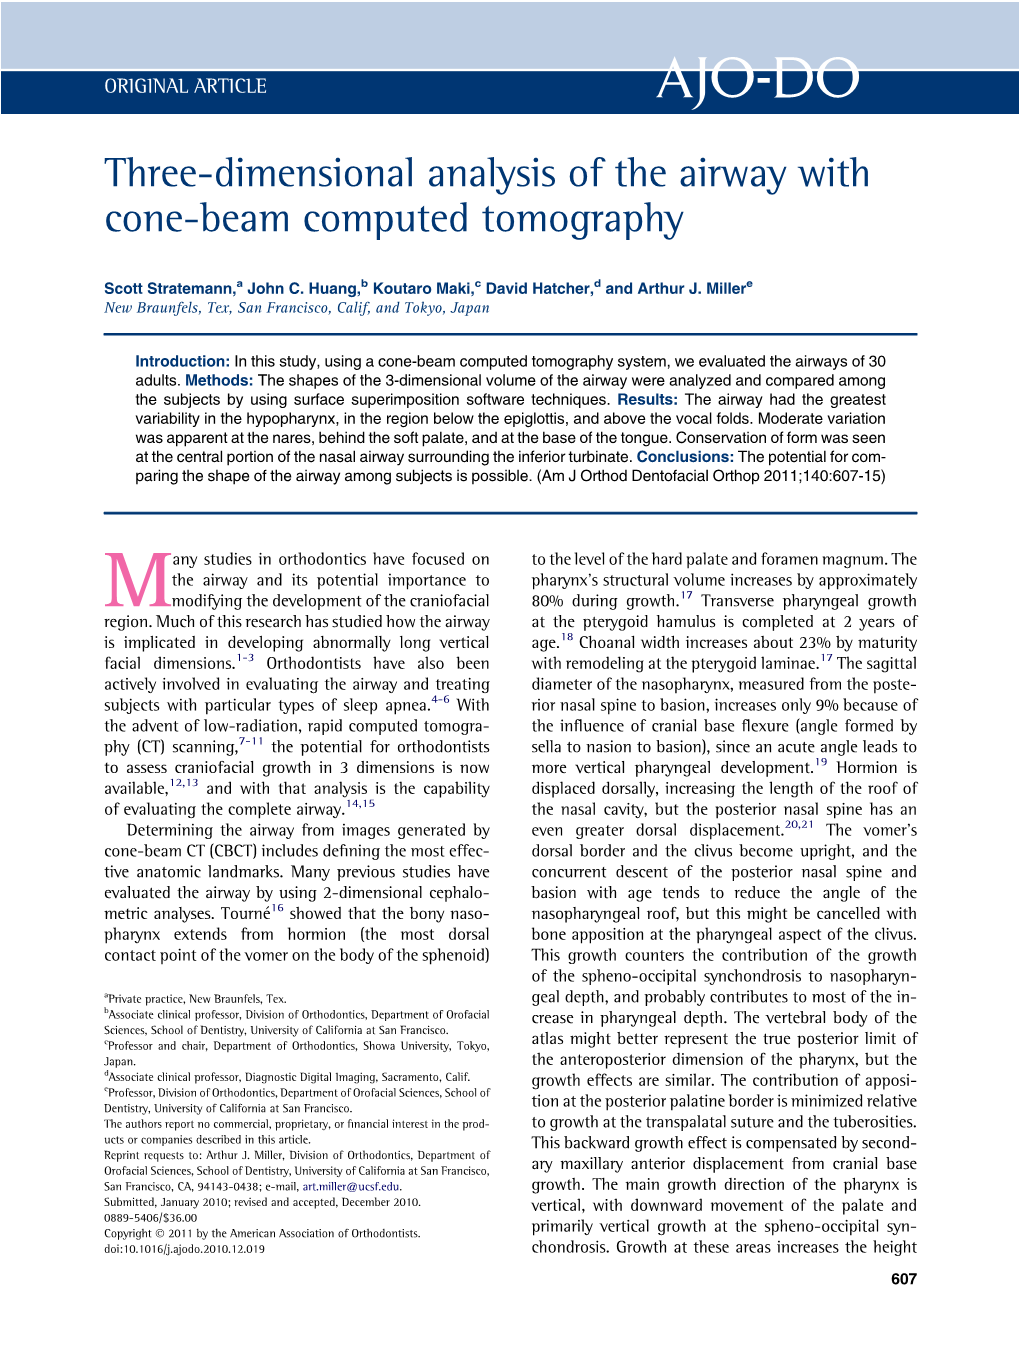 Three-Dimensional Analysis of the Airway with Cone-Beam Computed Tomography